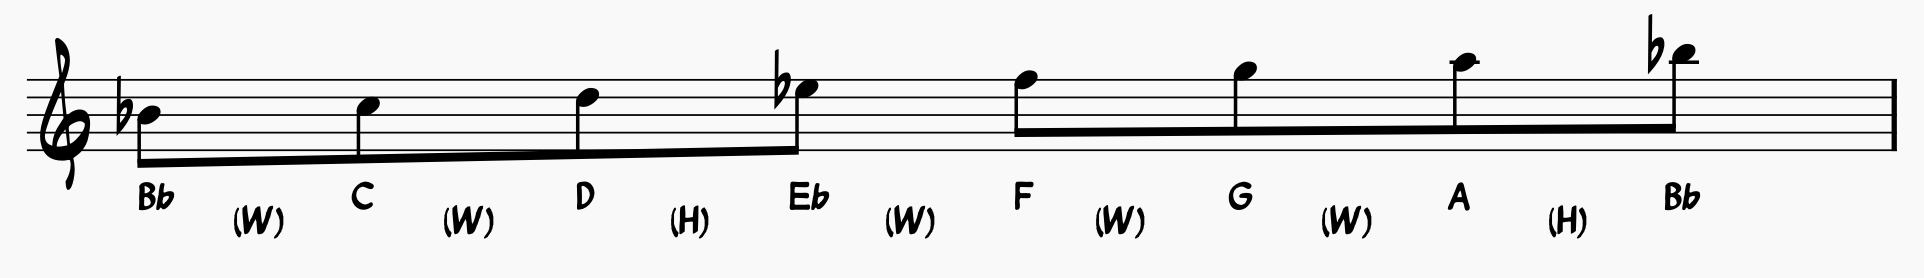 B Flat Major Scale notated with whole steps and half steps